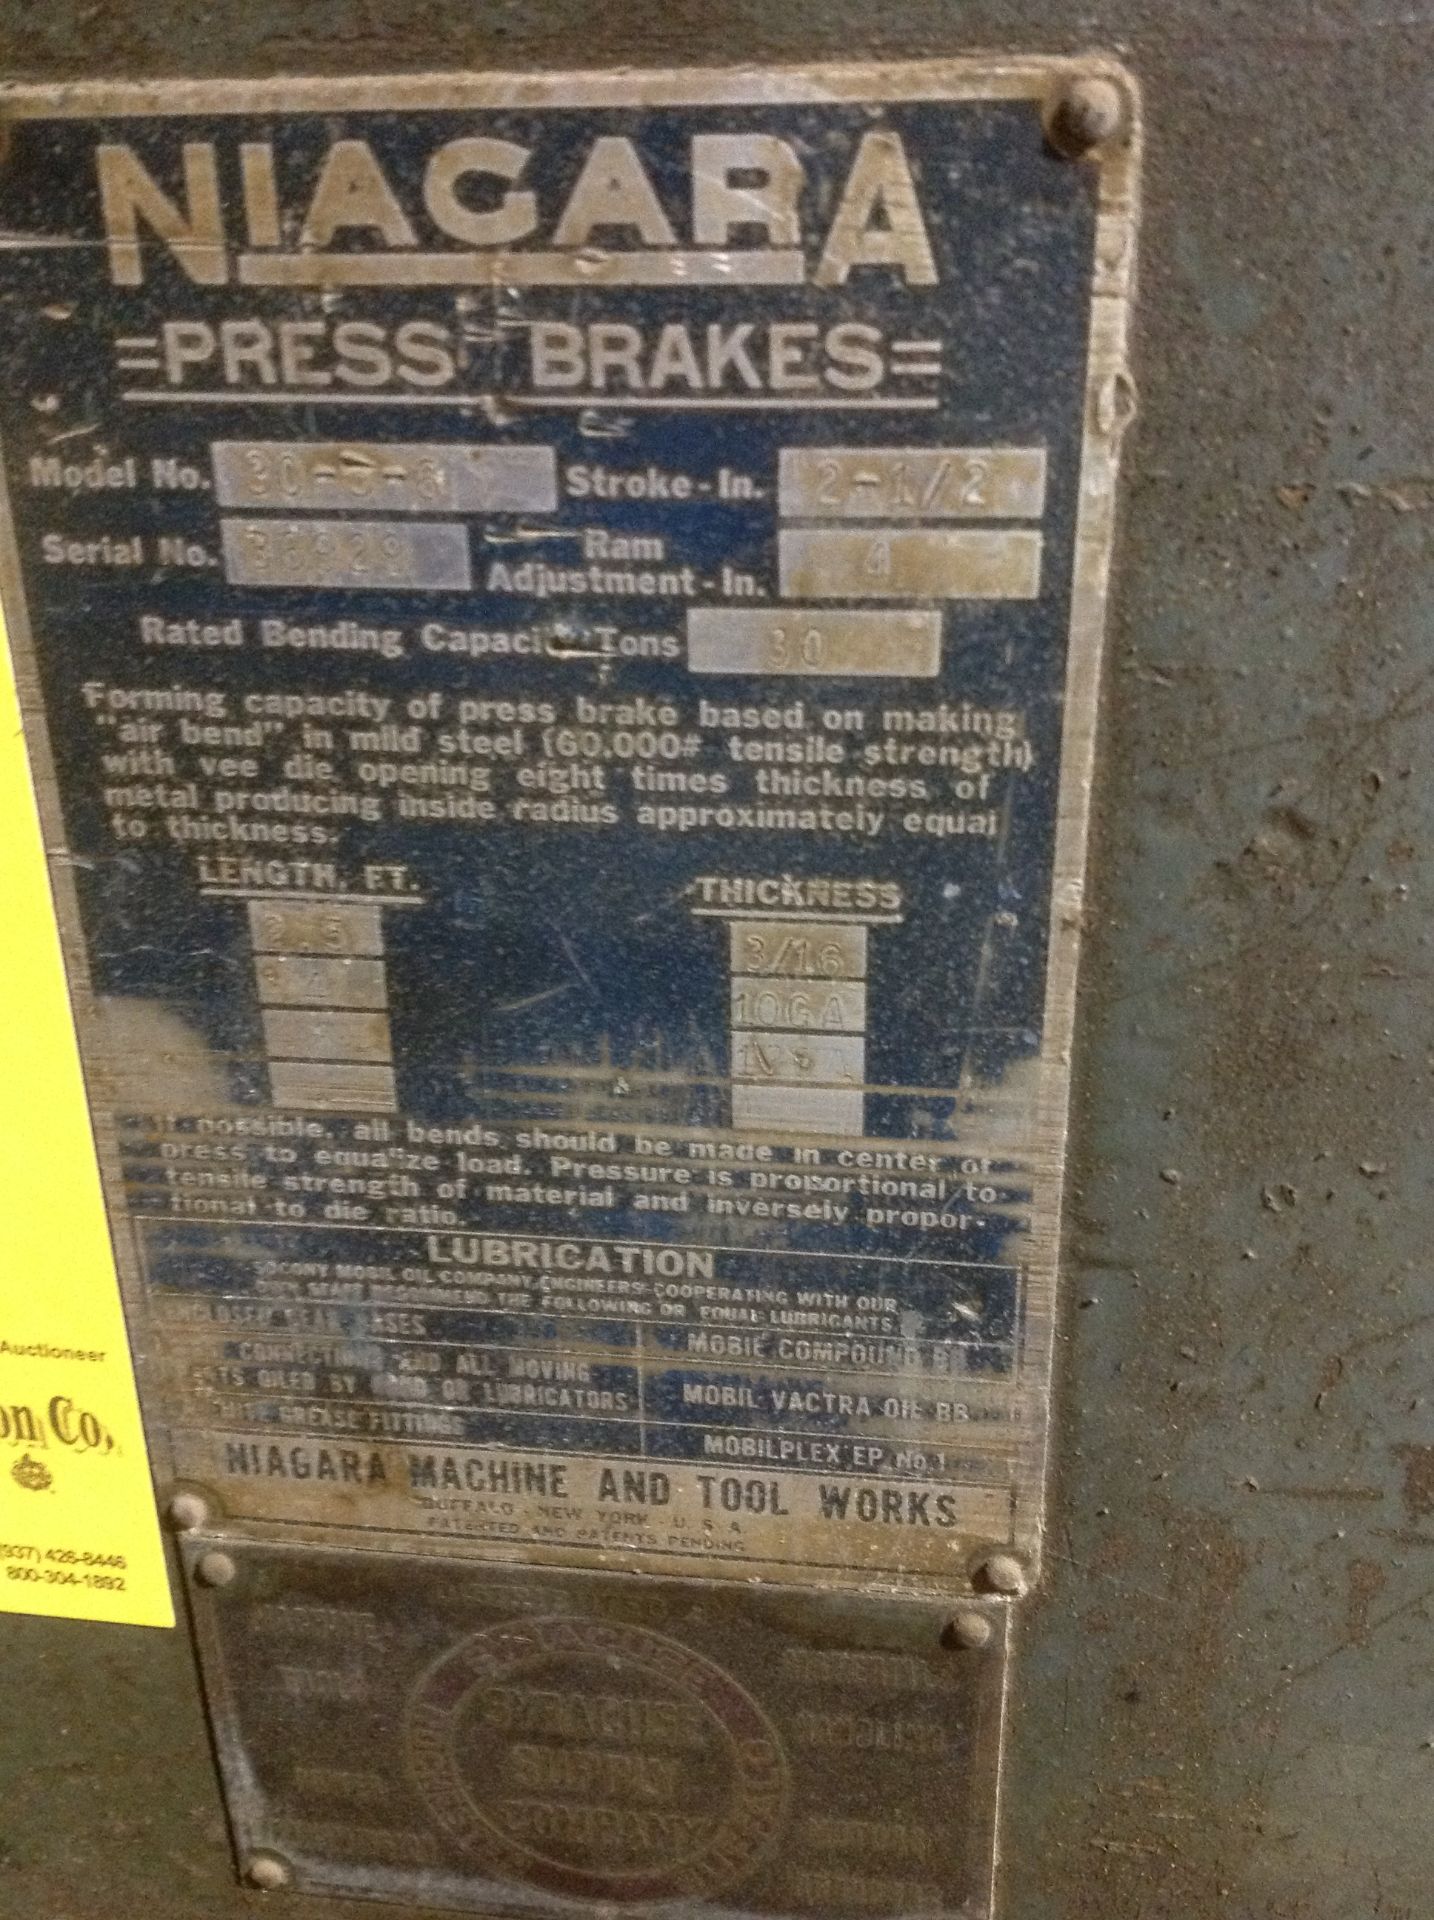 Niagara Model 30-5-6 Power Press Brake, s/n 36929, 30 Ton, 6 Ft. Overall, 5 Ft. 2 In. Between - Image 3 of 4